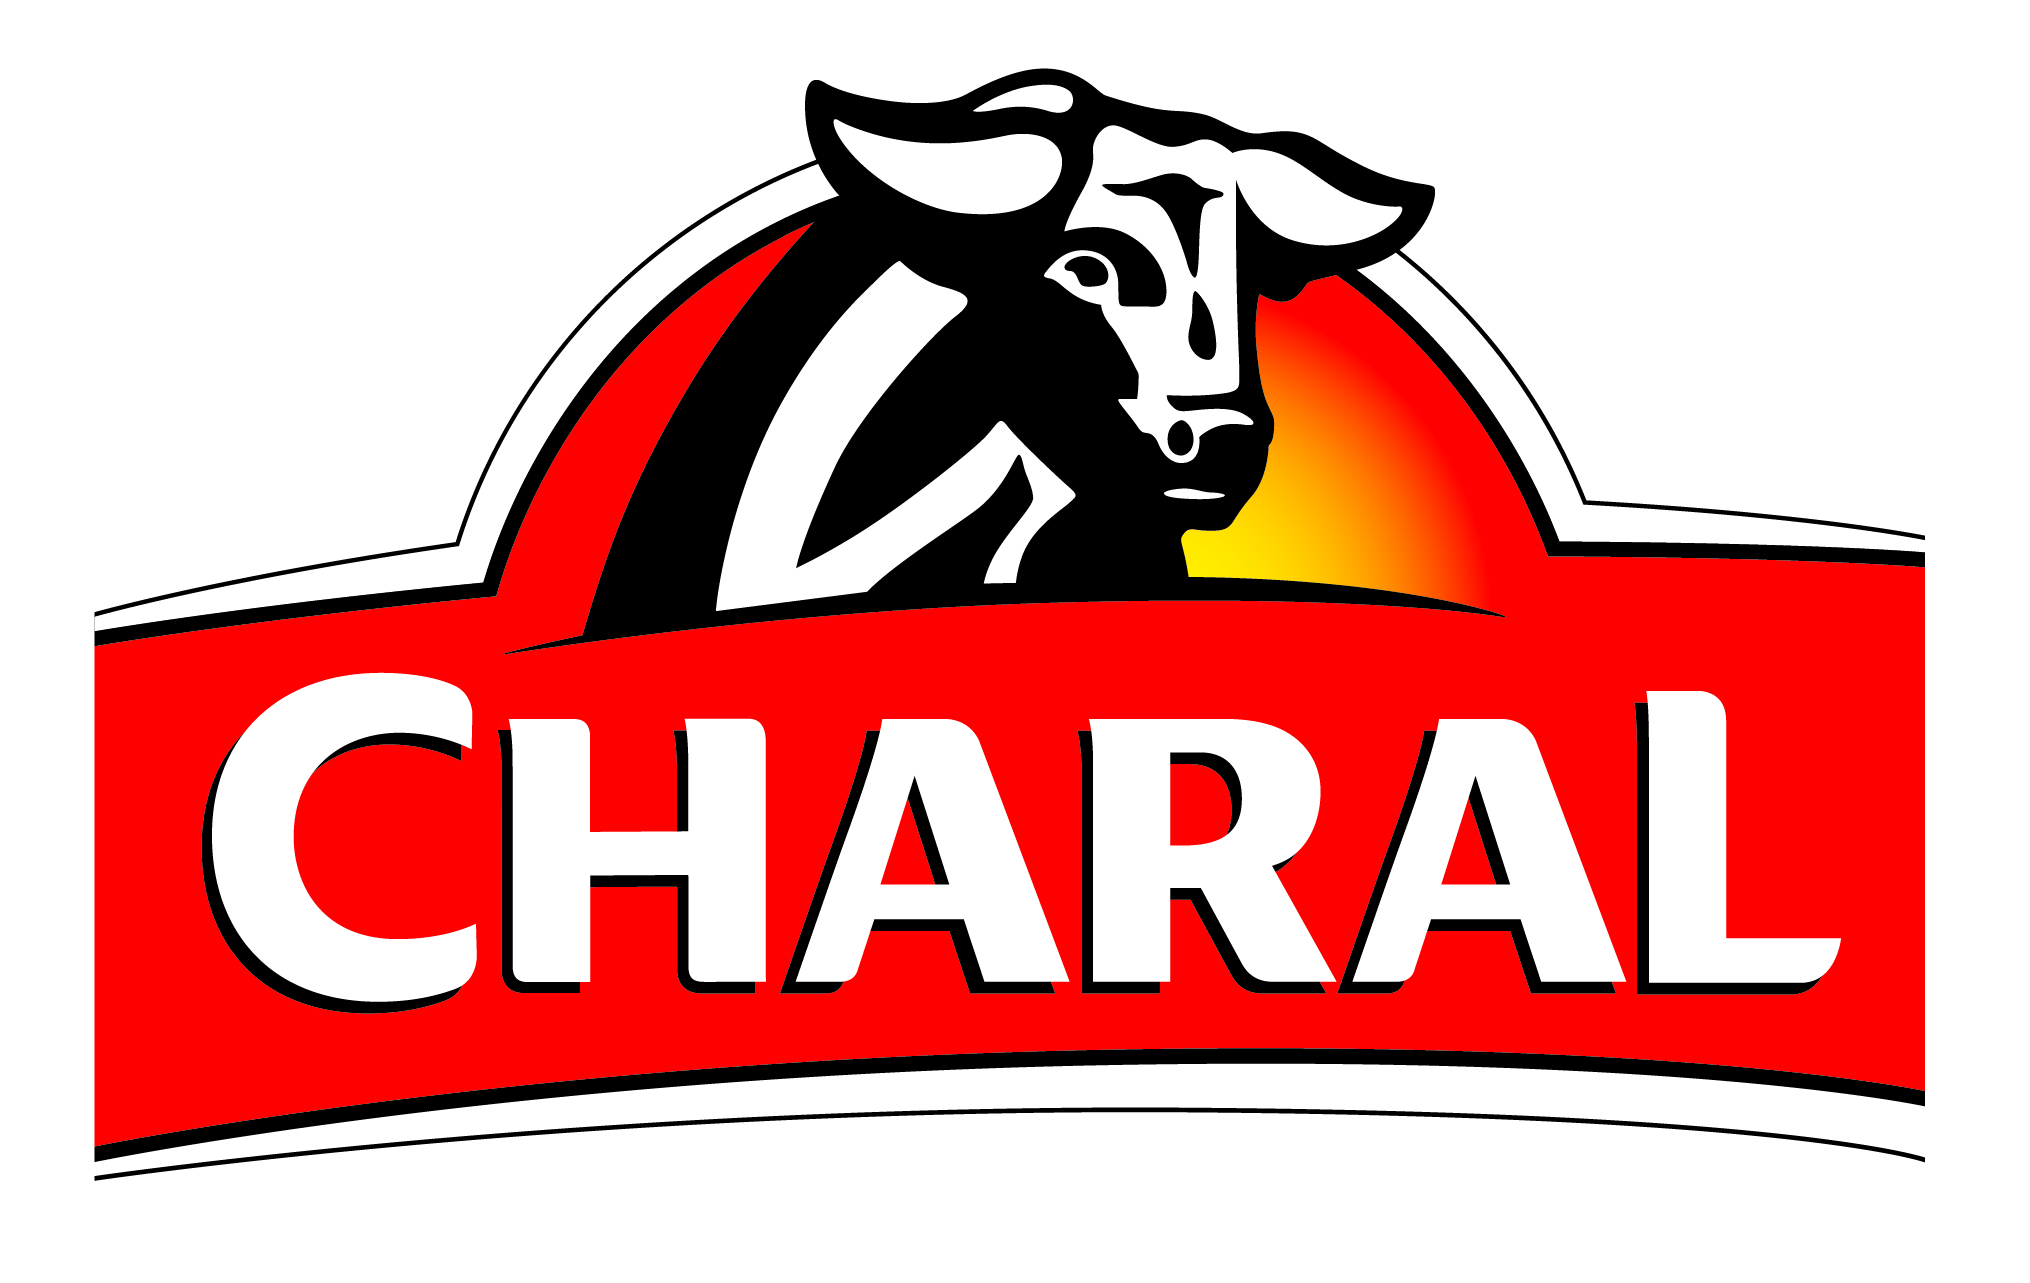 CHARAL CHOLET